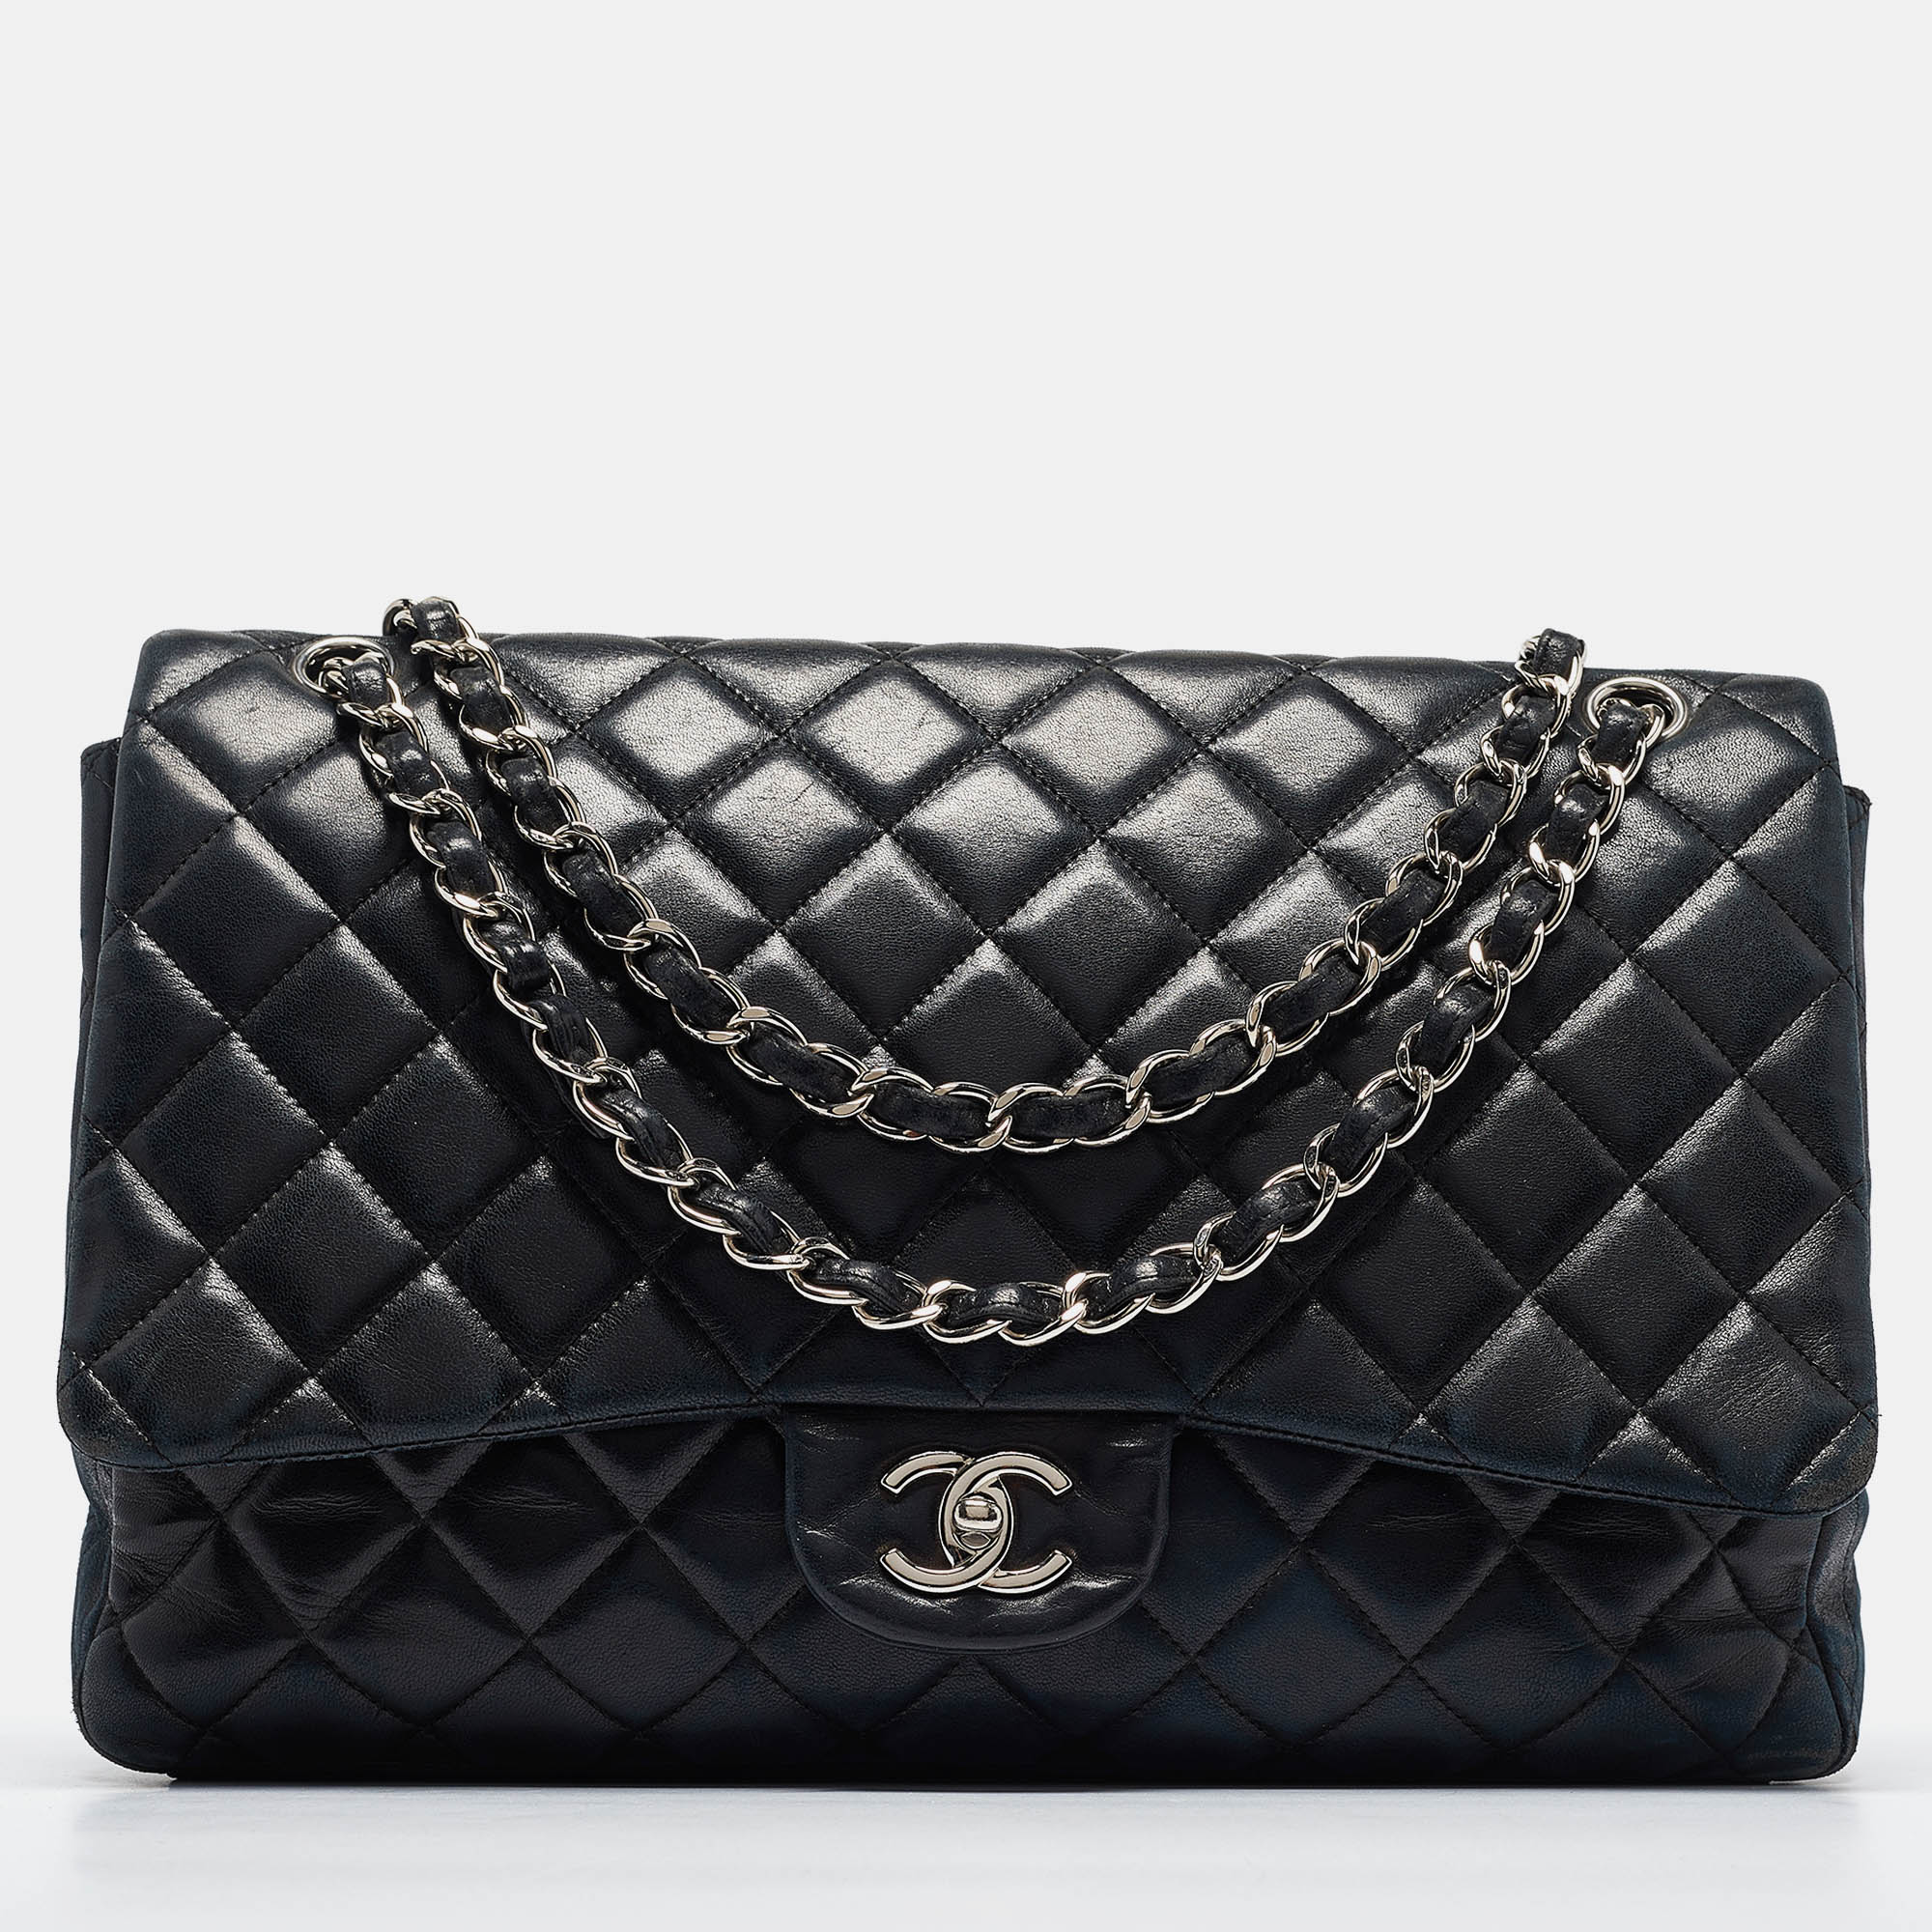 

Chanel Black Quilted Leather Maxi Classic Single Flap Bag